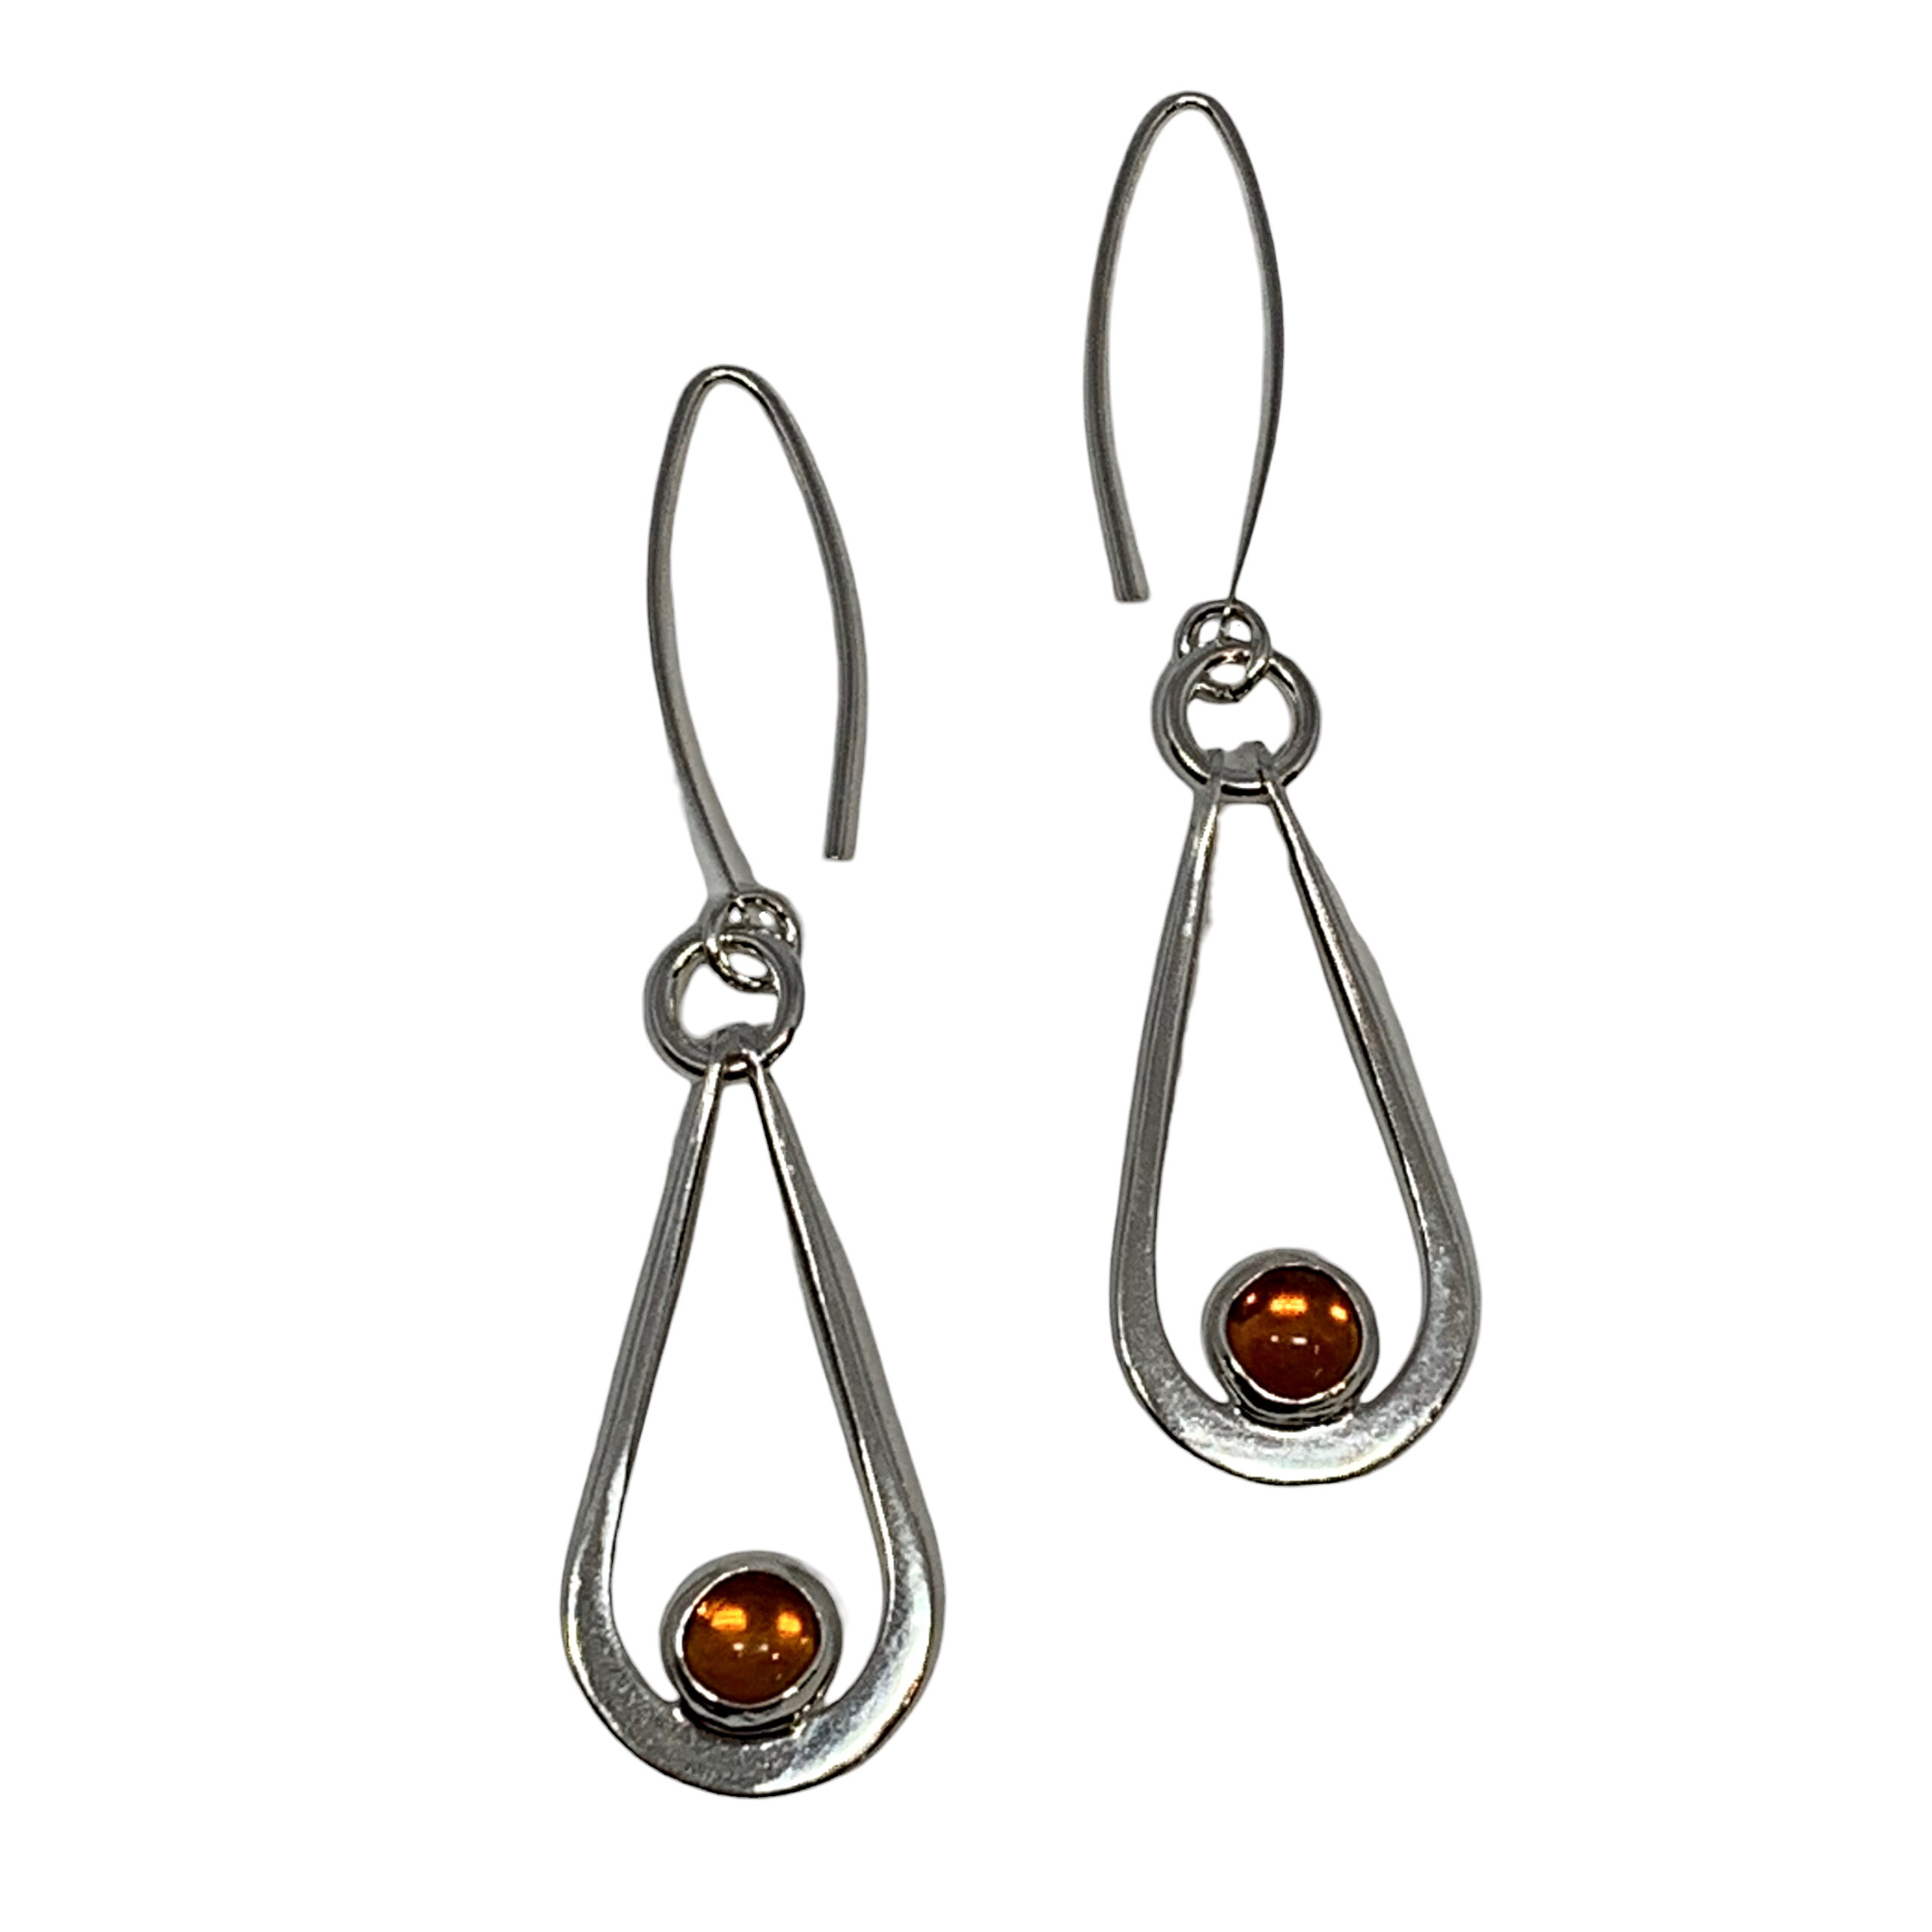 Handmade silver + amber earrings by A&R Jewellery at Effusion Art Gallery in Invermere, BC.